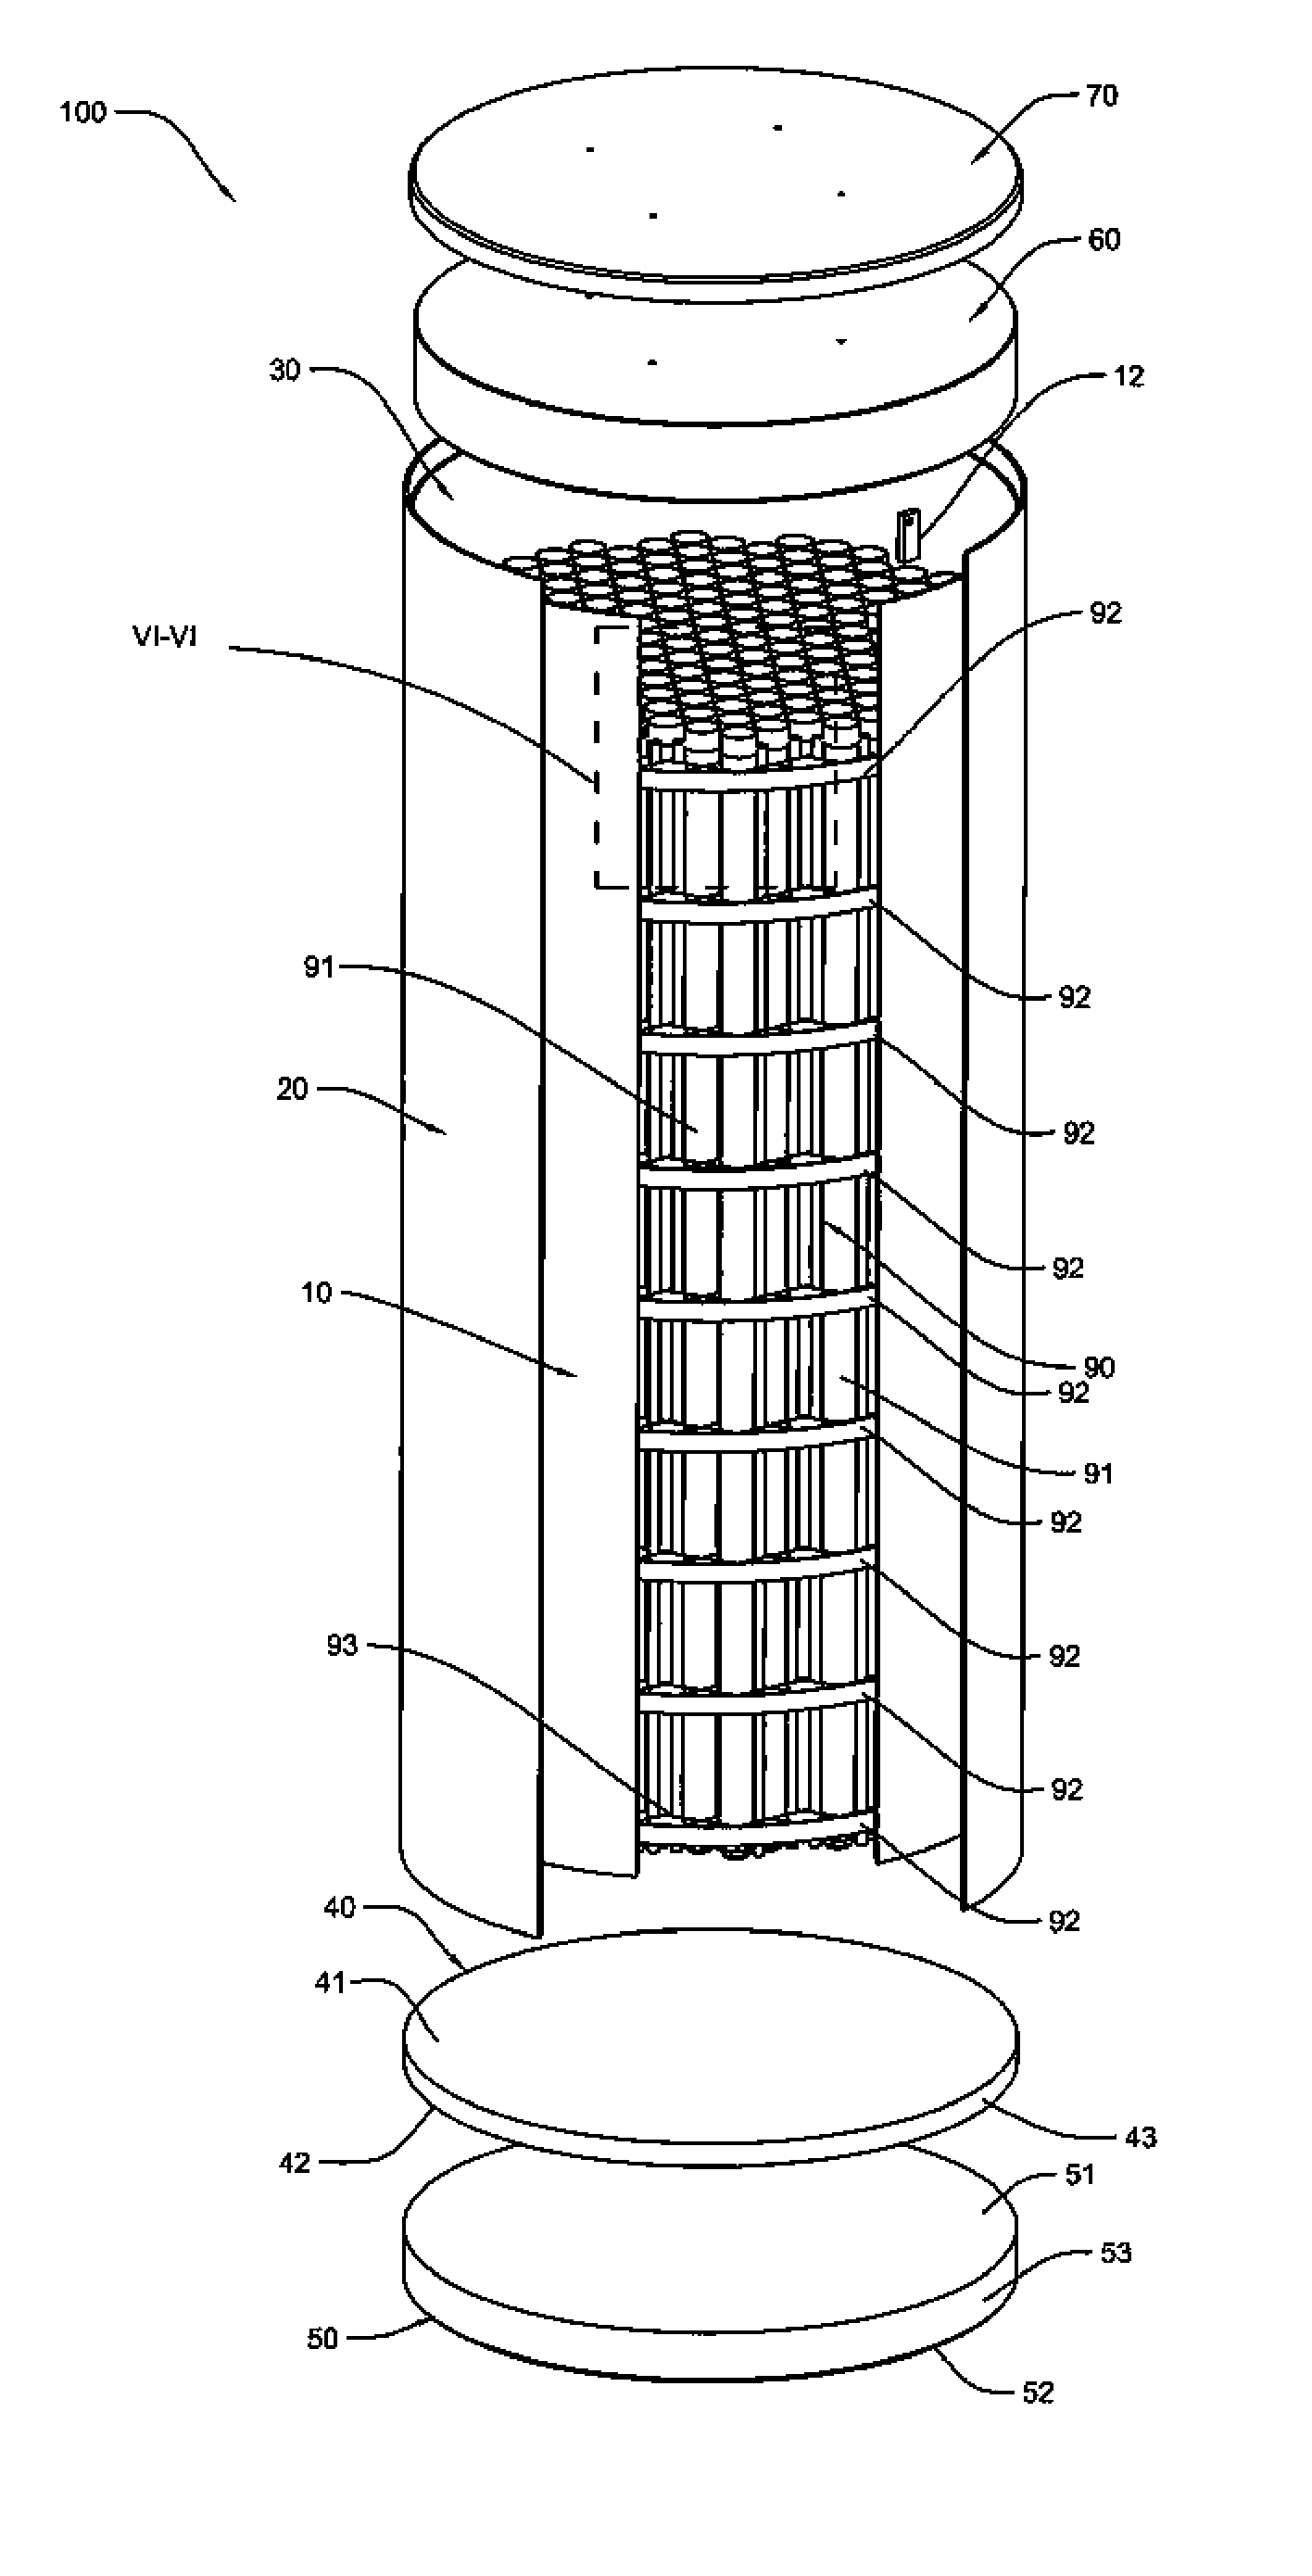 Canister apparatus and basket for transporting, storing and/or supporting spent nuclear fuel